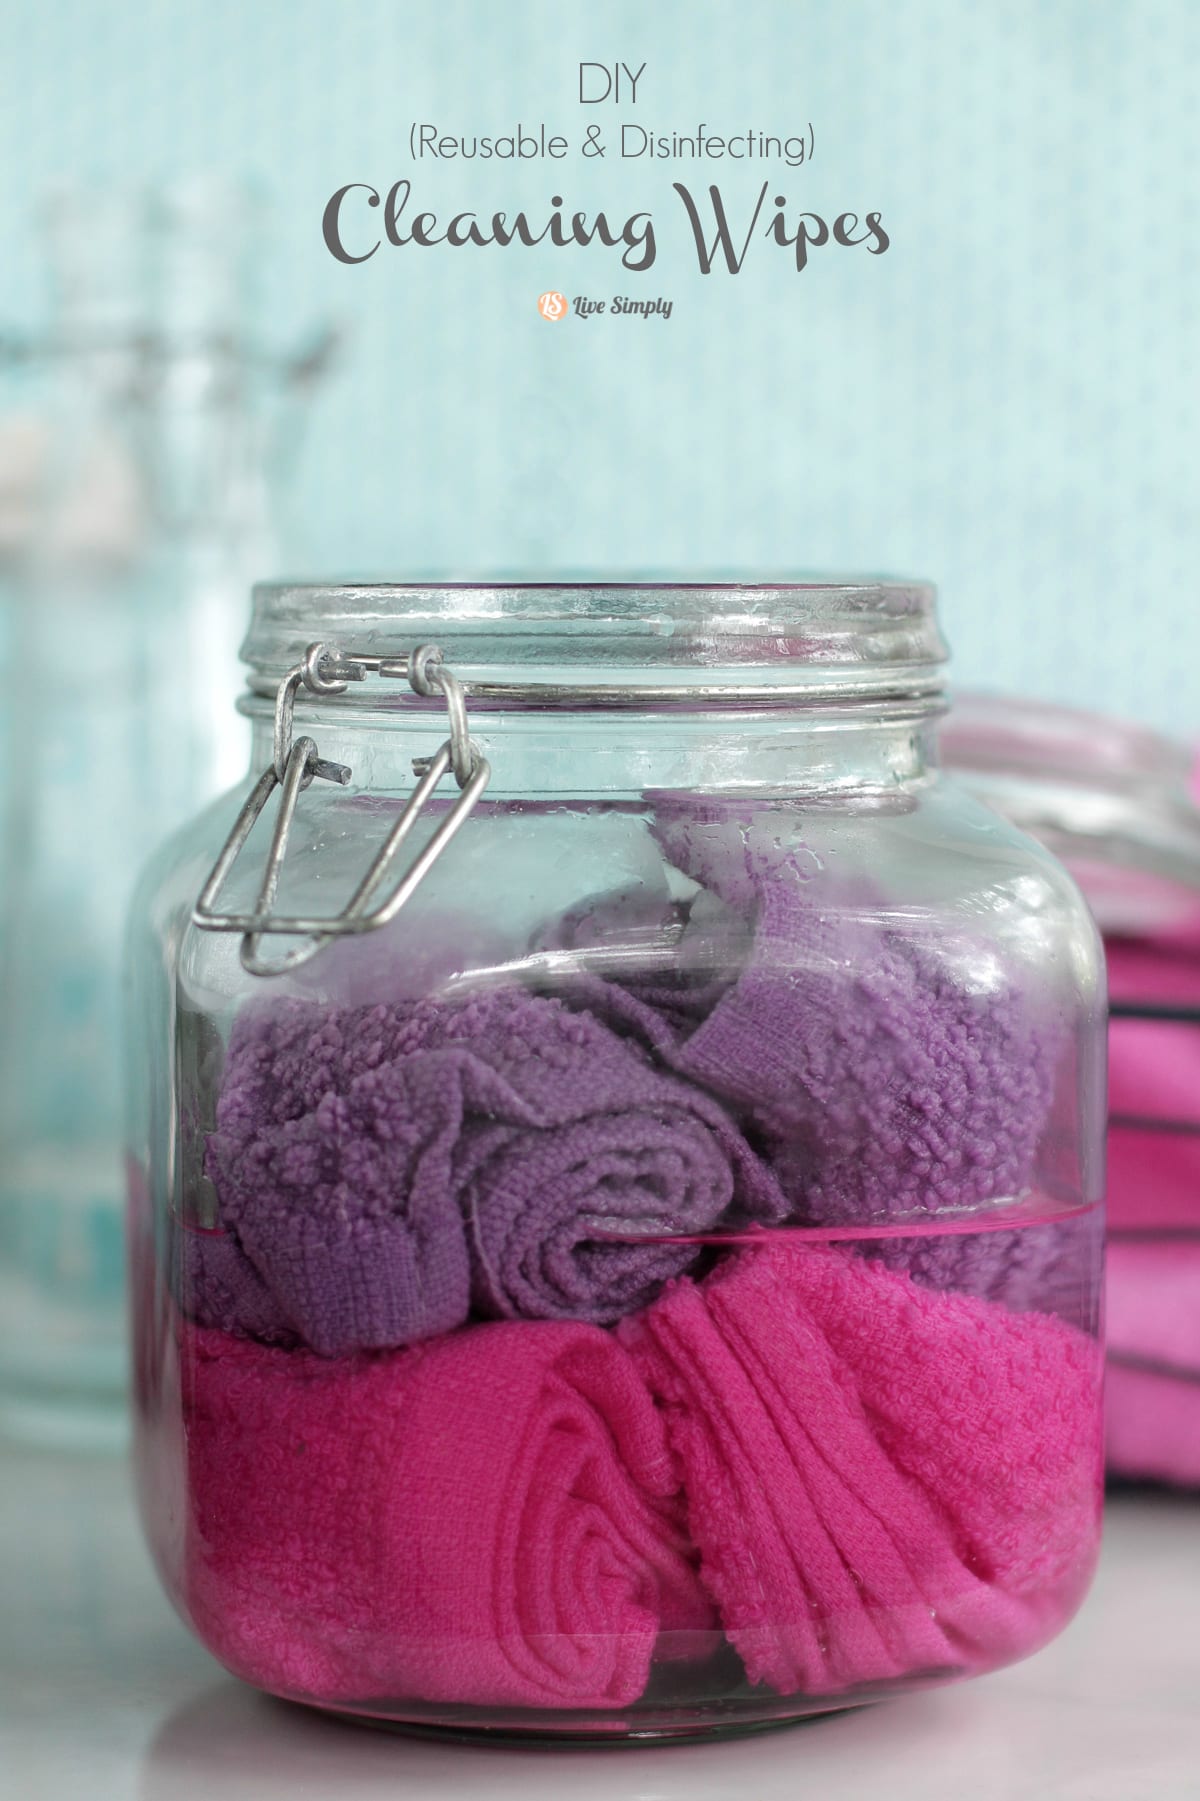 DIY Cleaning Wipes (Reusable & Disinfecting)